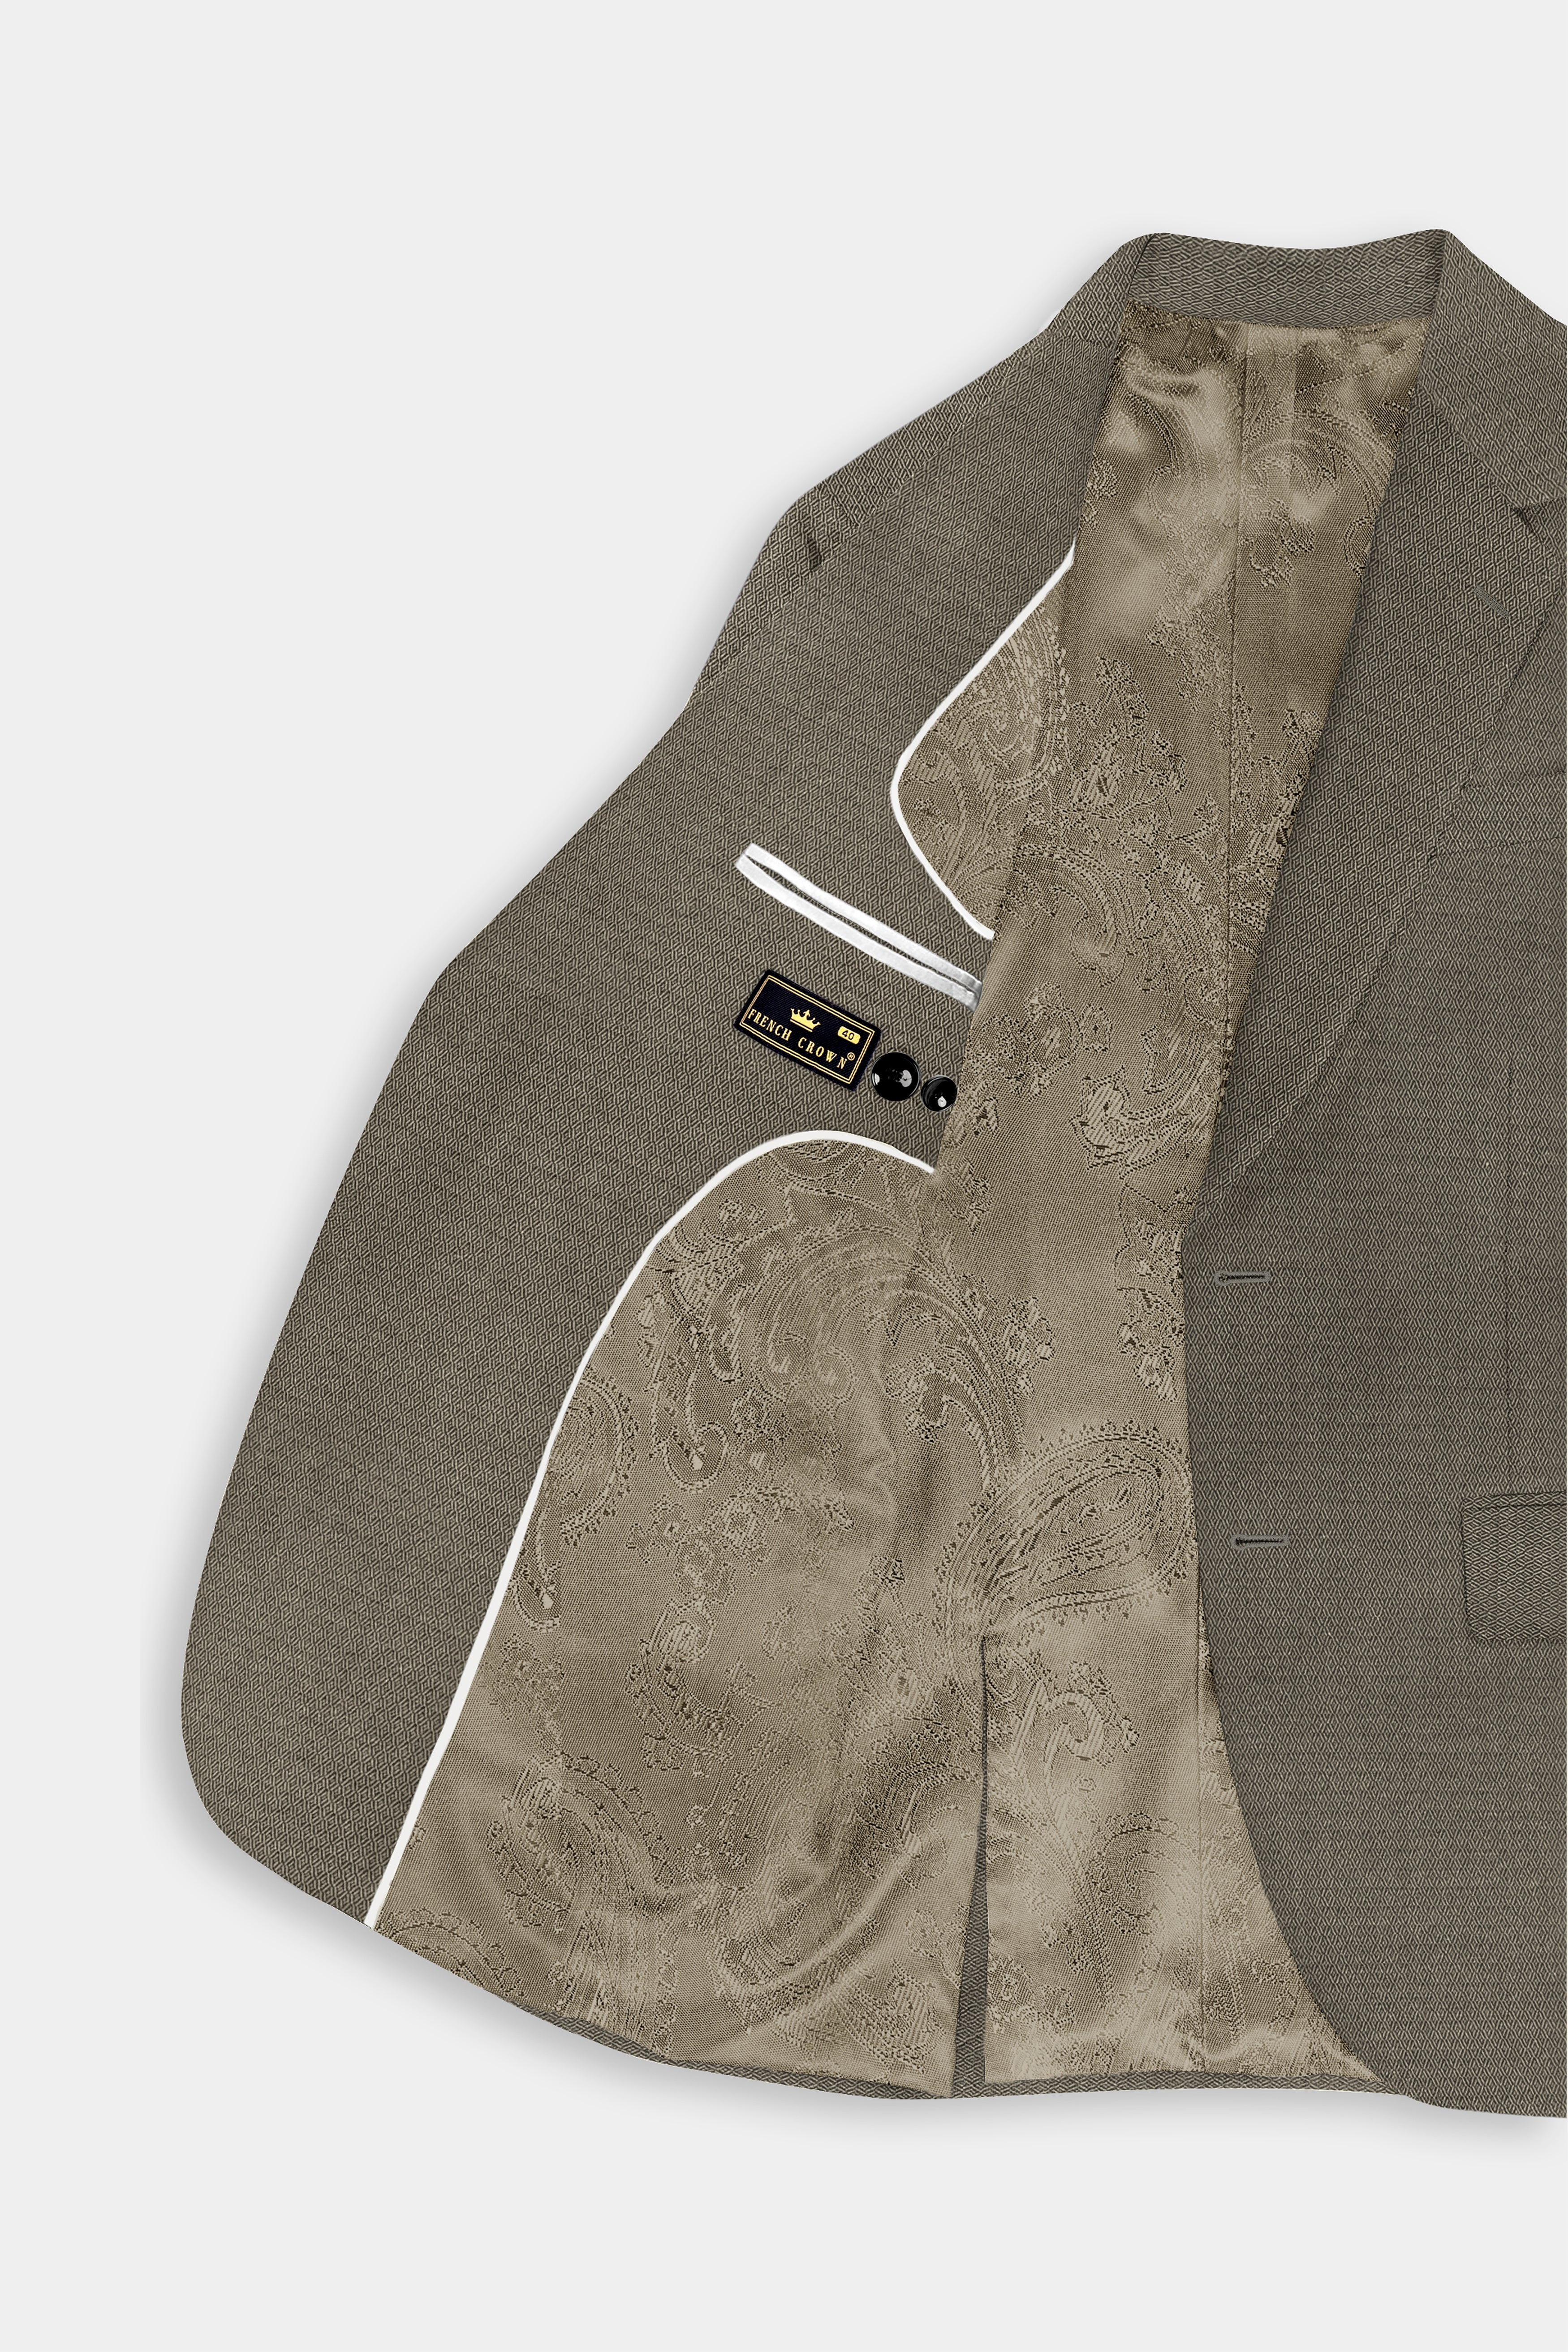 Wenge Brown Dobby Textured wool blend Suit